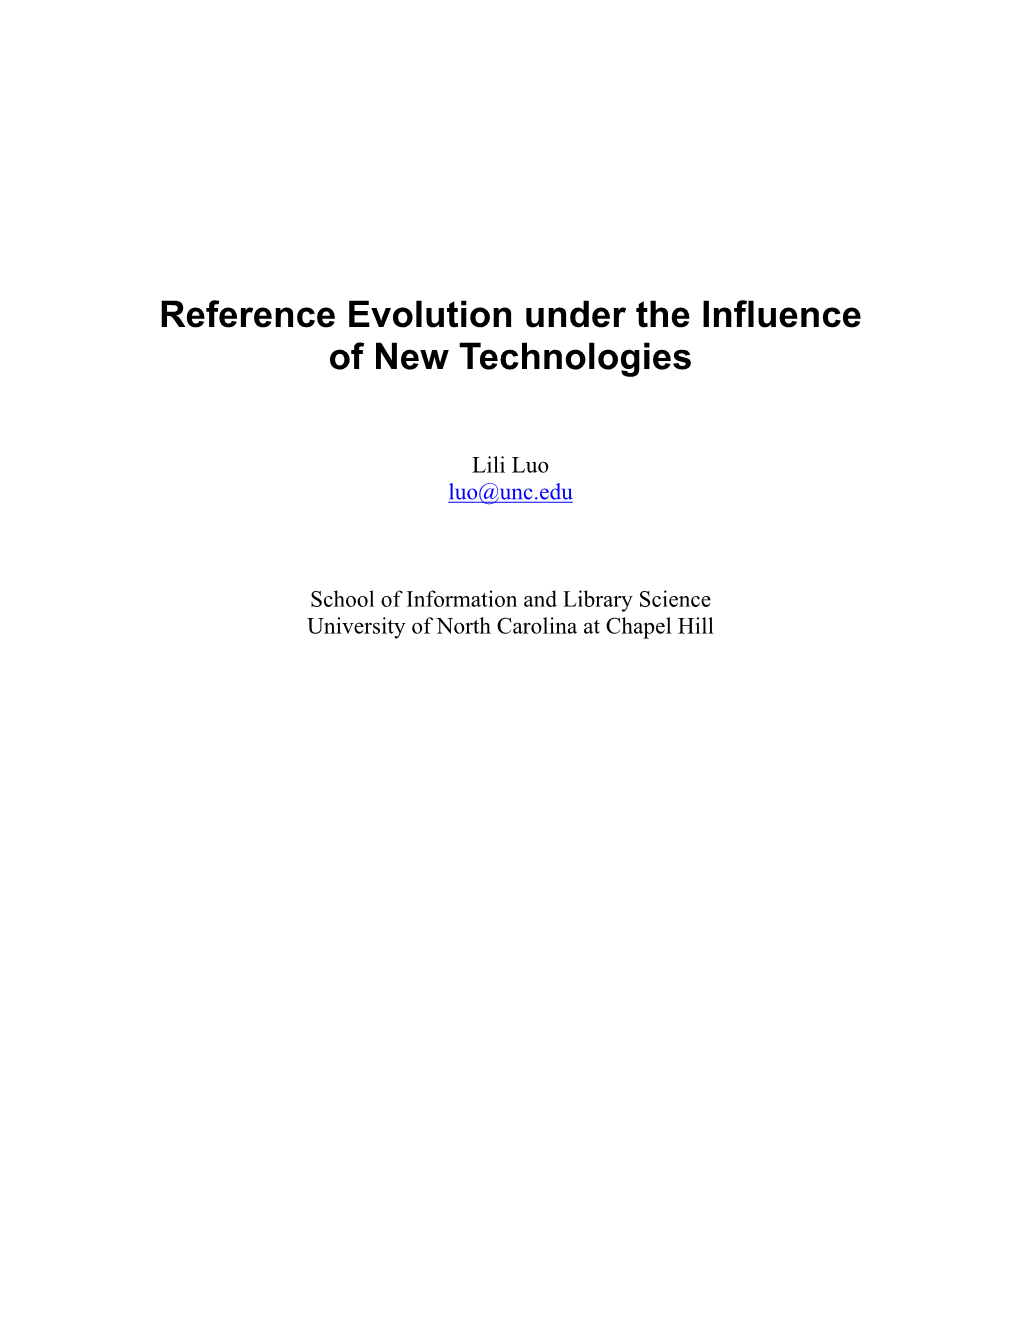 Reference Evolution Under the Influence of New Technologies